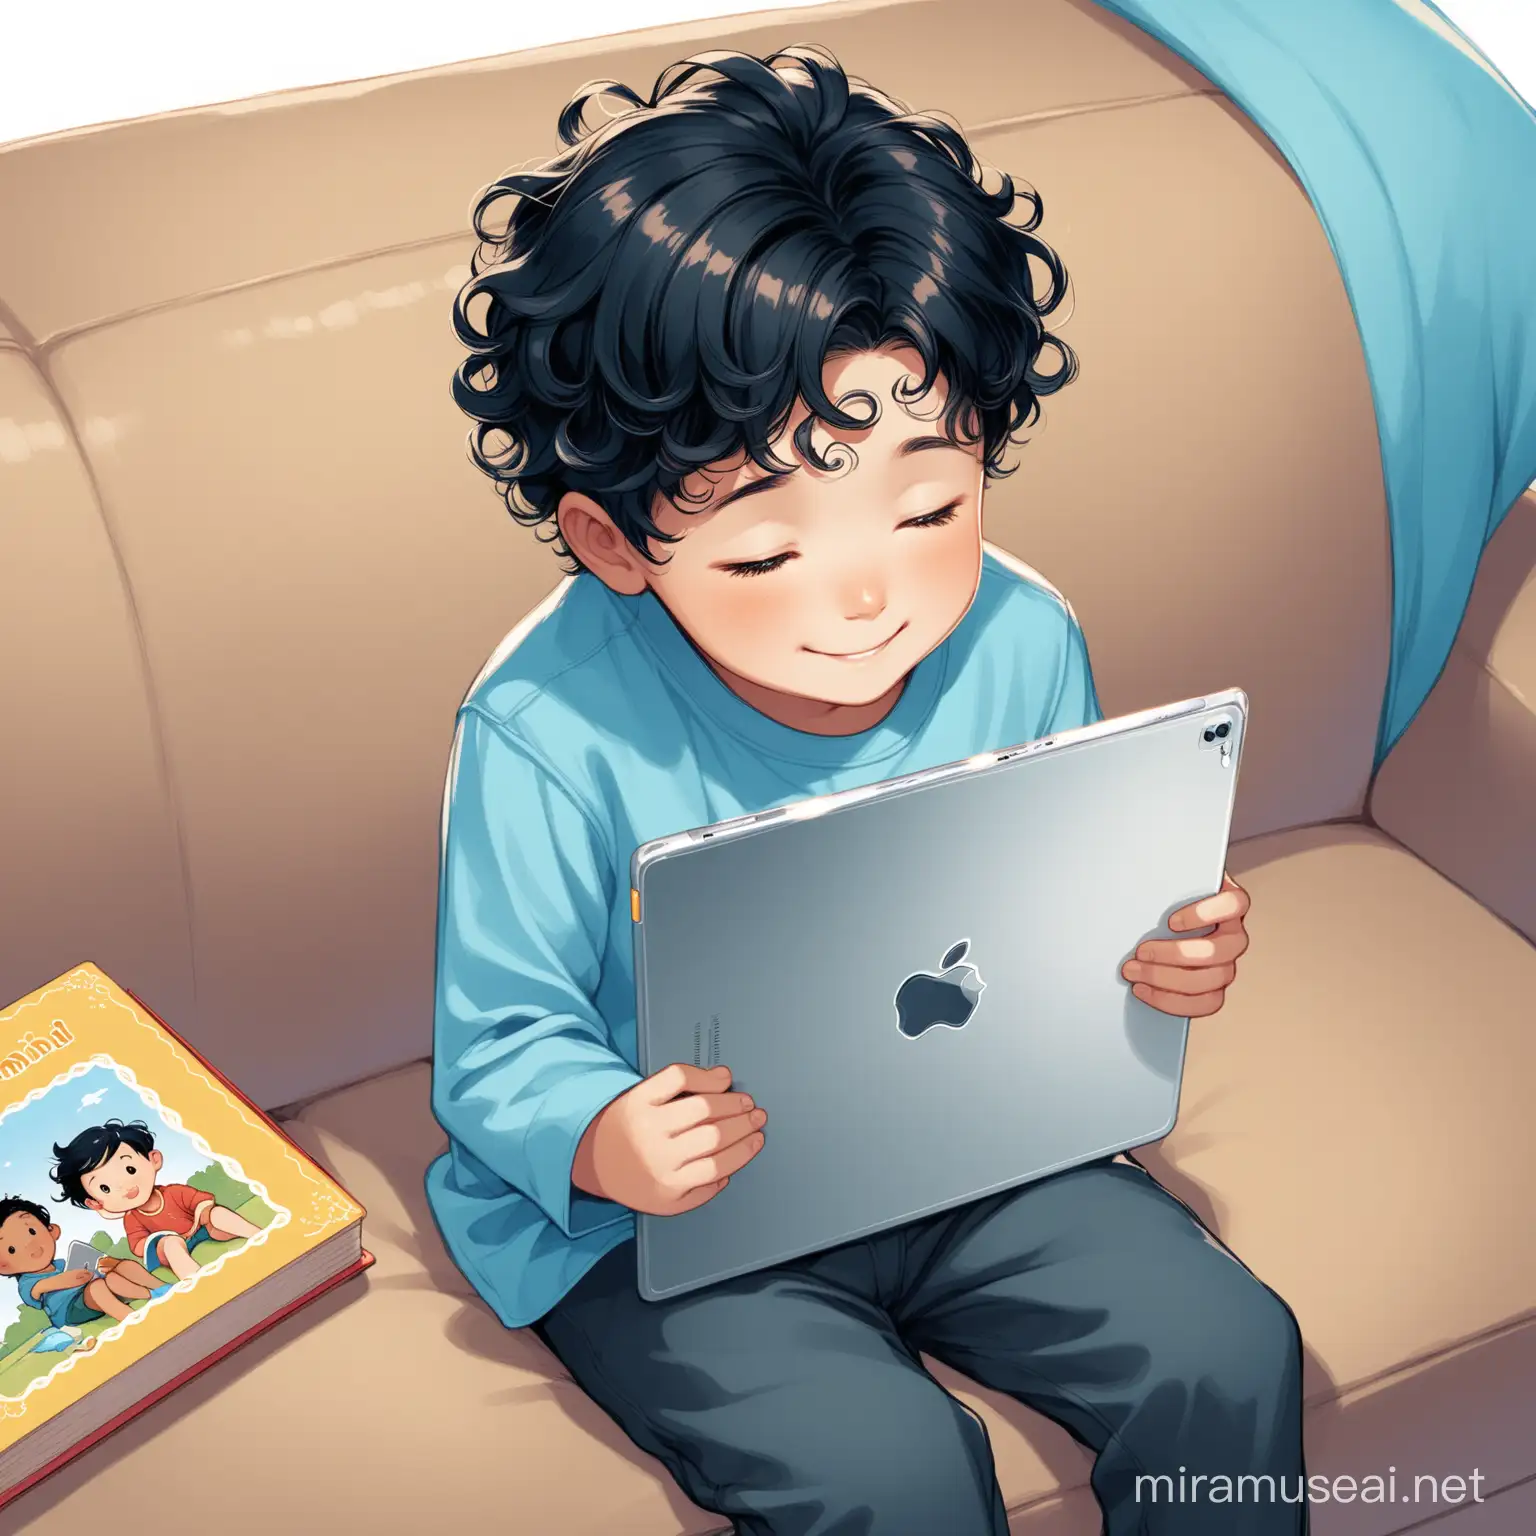 a little boy with curly black hair wearing a plain blue shirt sitting on couch smiling, looking down at a silver iPad with nothing on the back of it, drawn like a children's picture book illustration